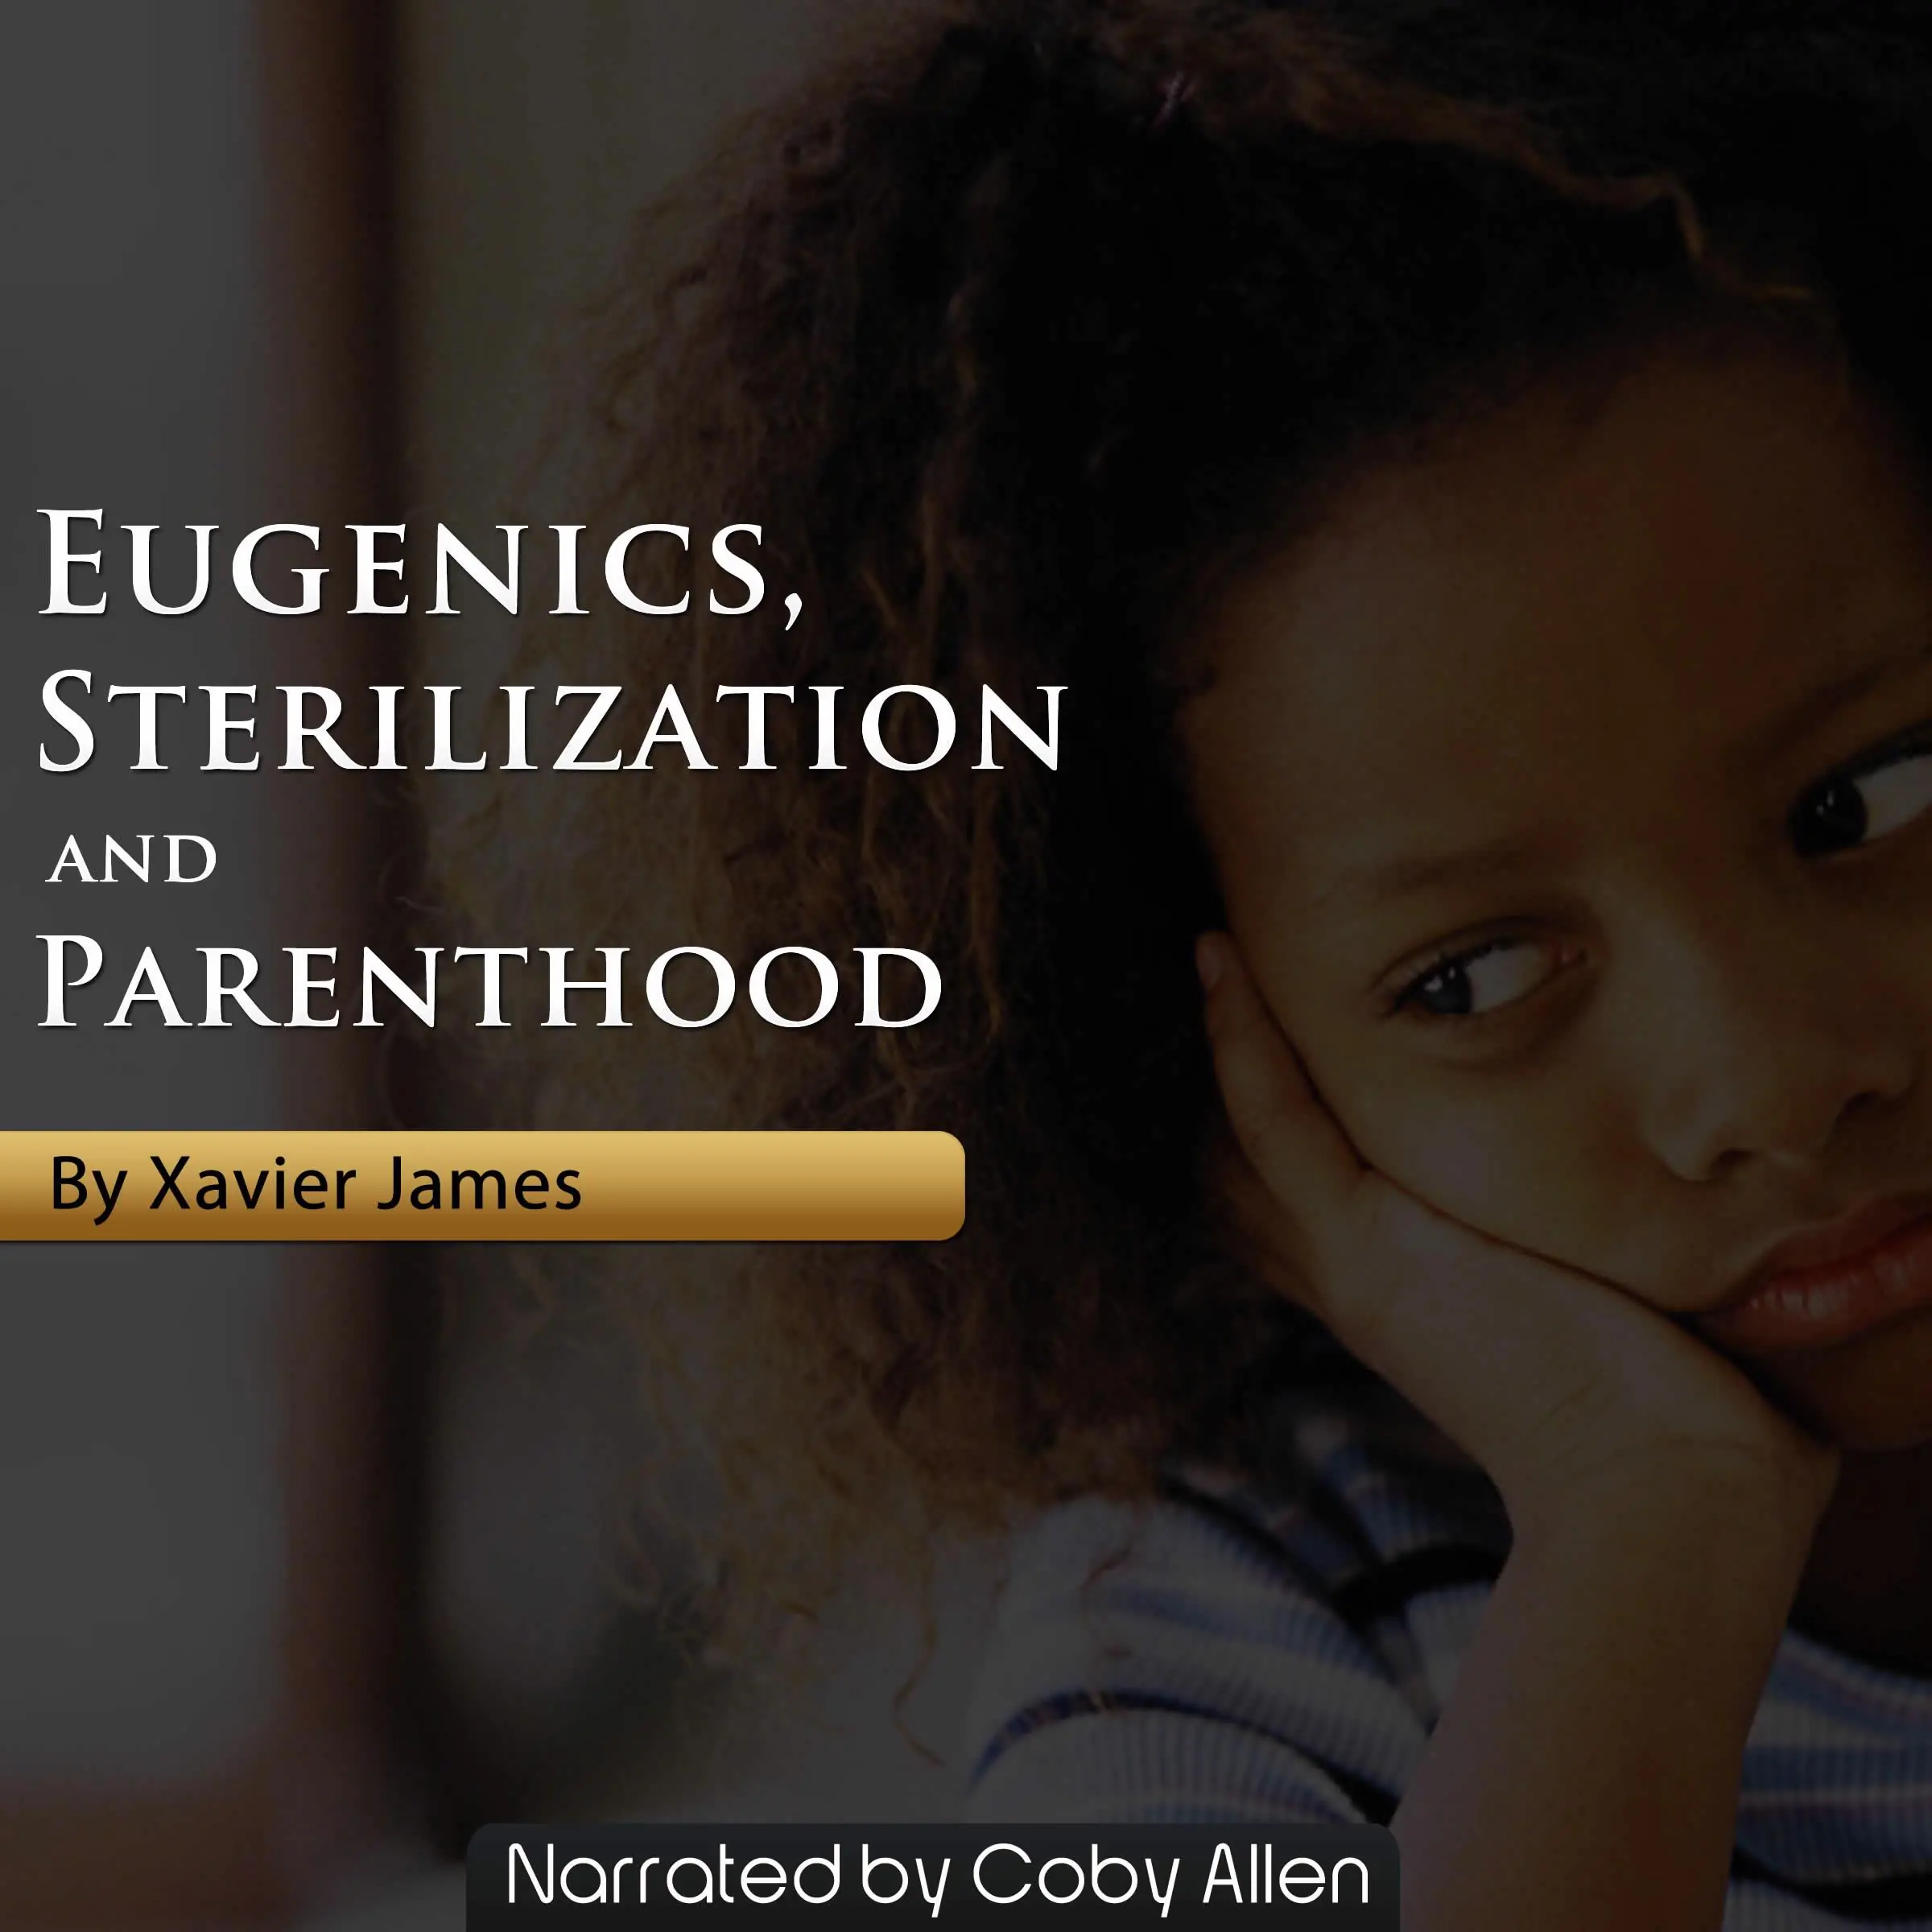 Eugenics, Sterilization and Planned Parenthood Audiobook by Xavier James